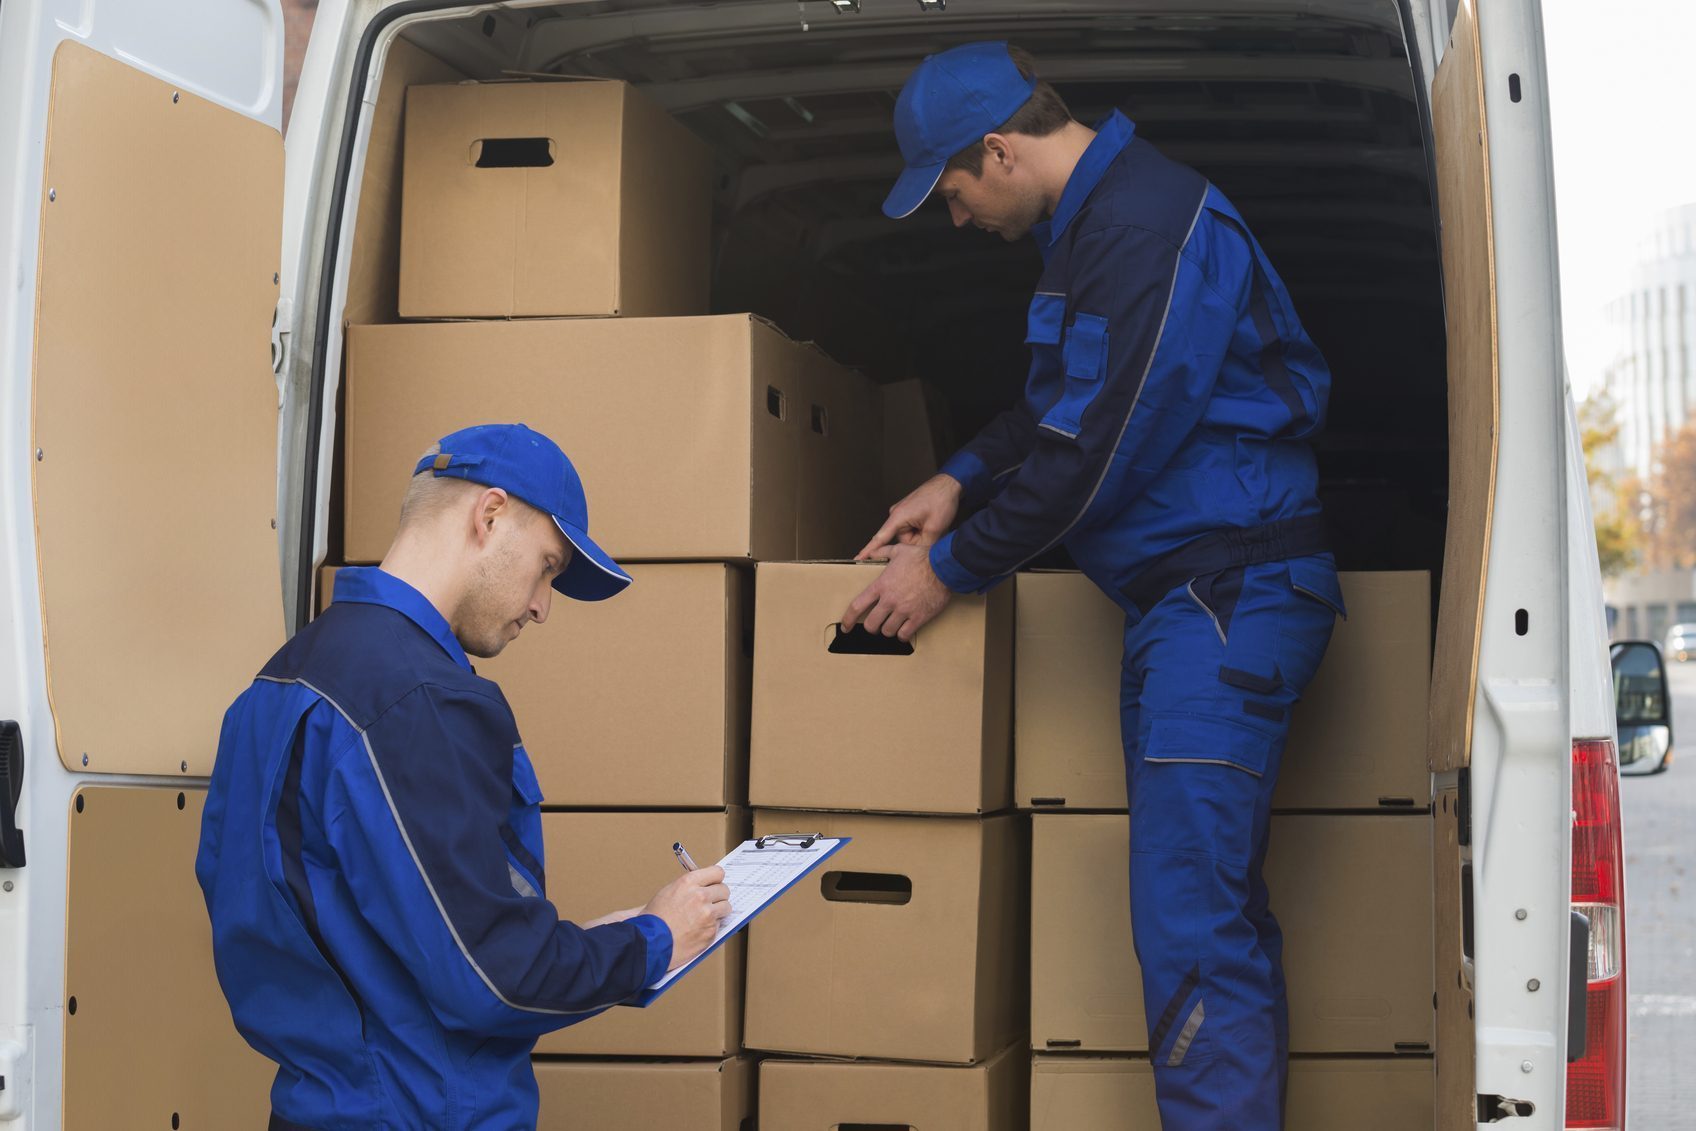 Around the Clock Movers will help you organize your move